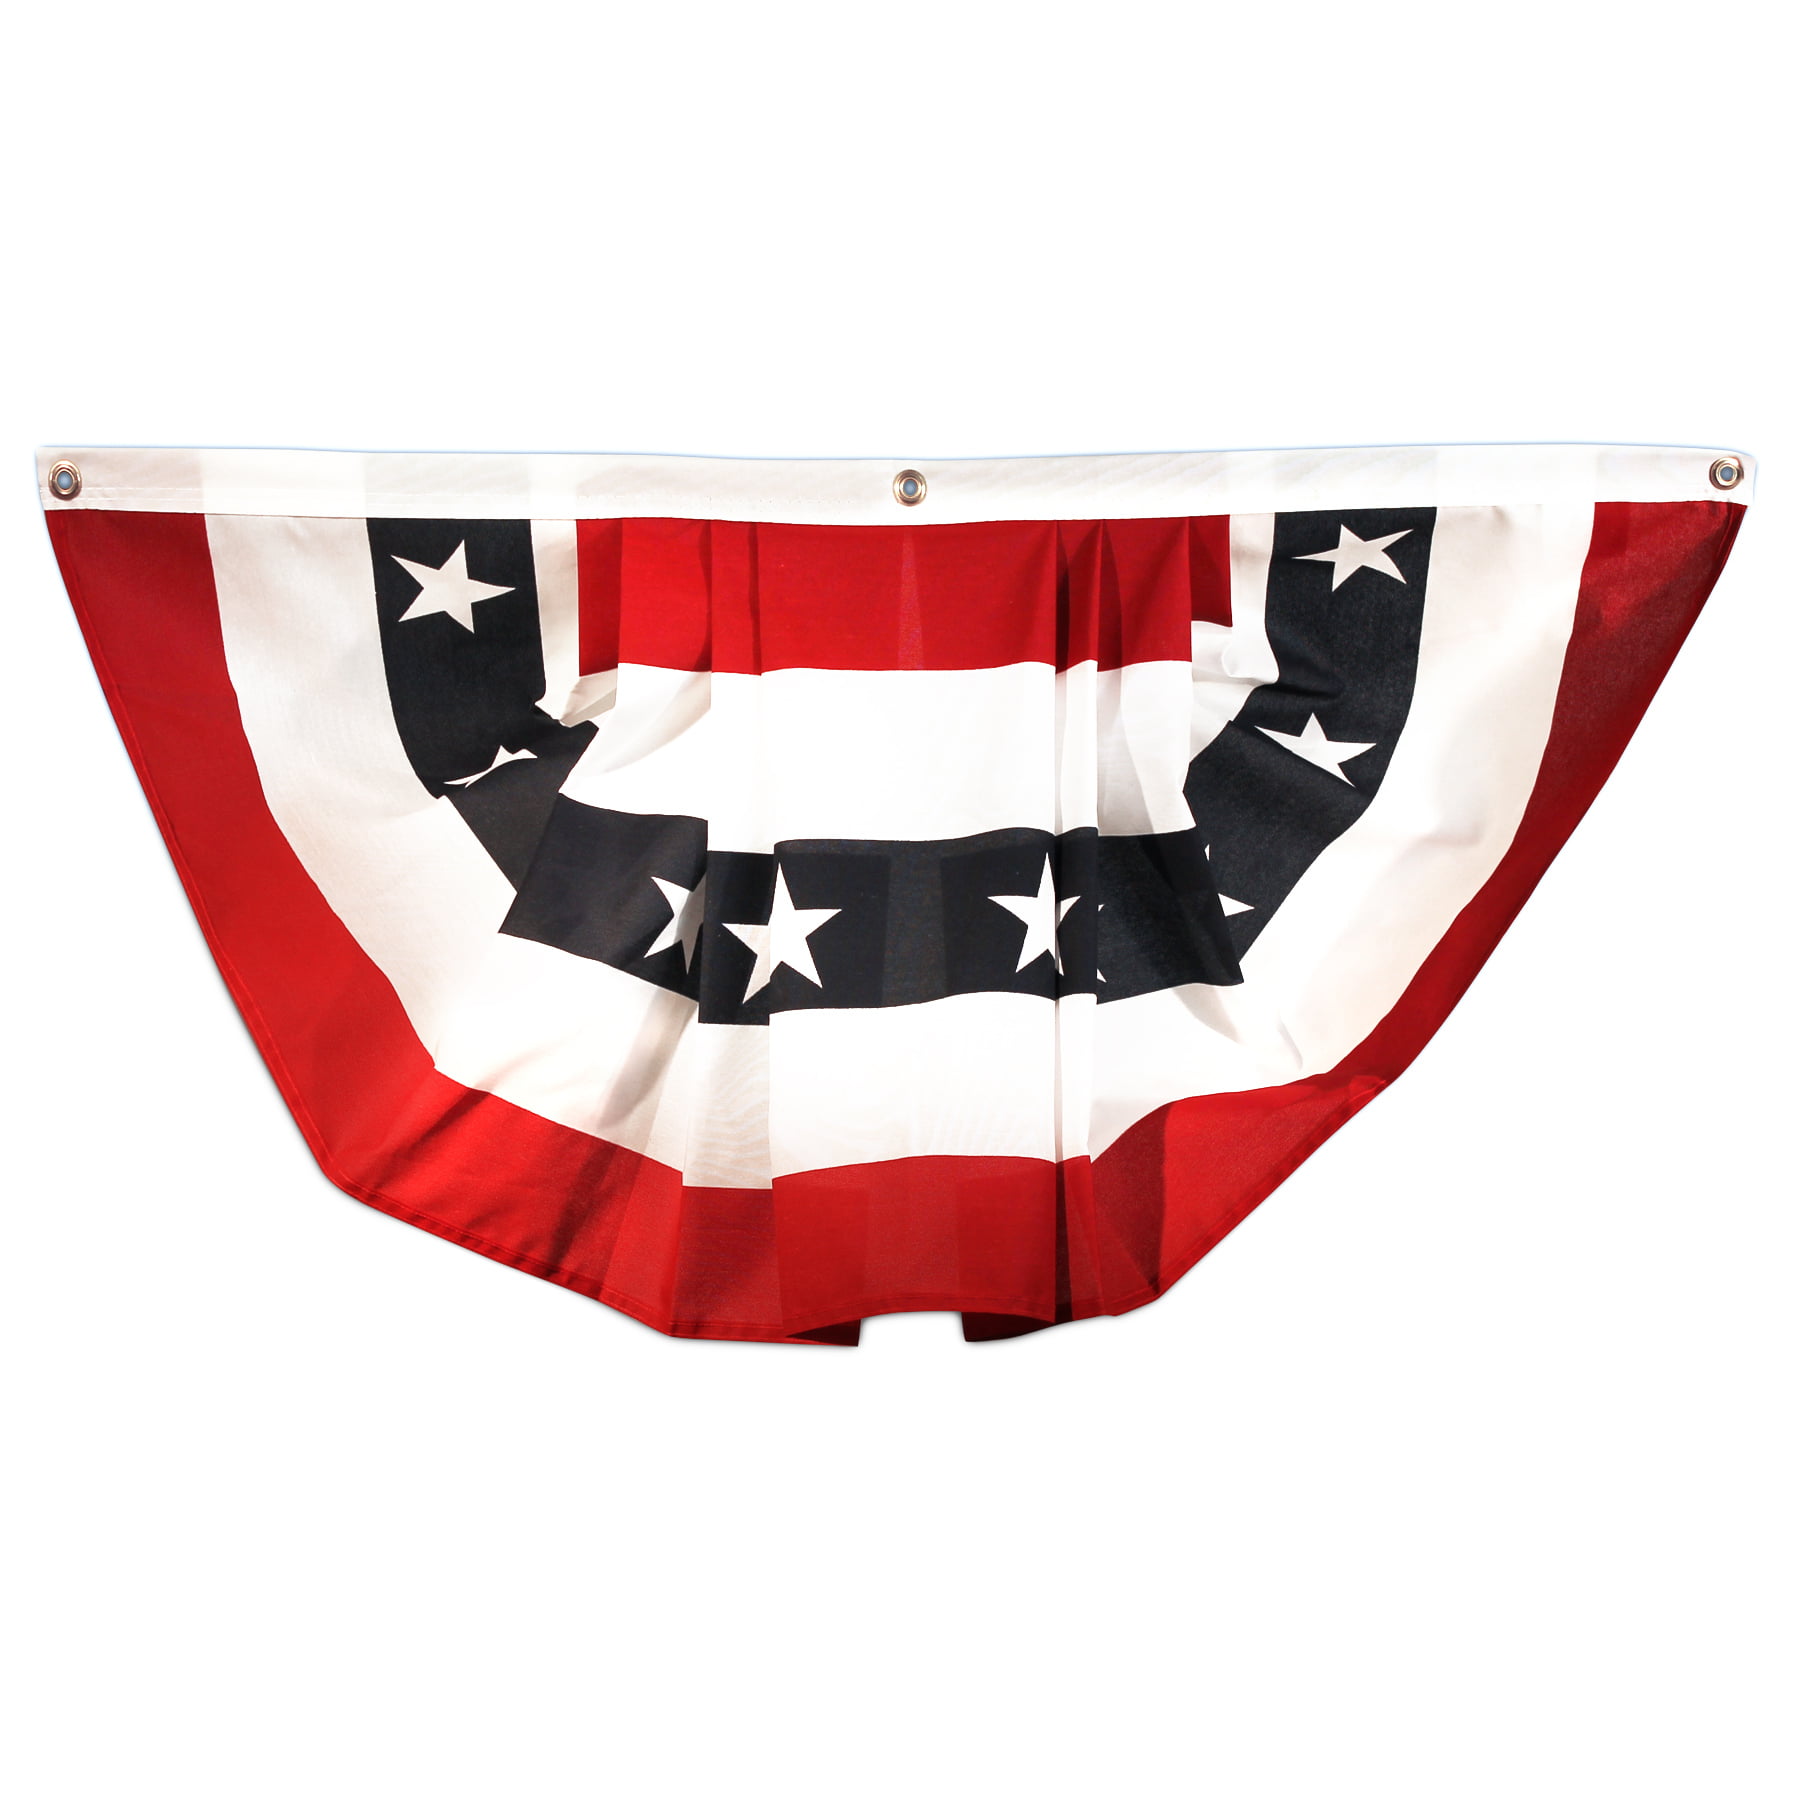 Printed Stripes Stars US Pleated Fan Bunting Half Banner Flag Independence Day